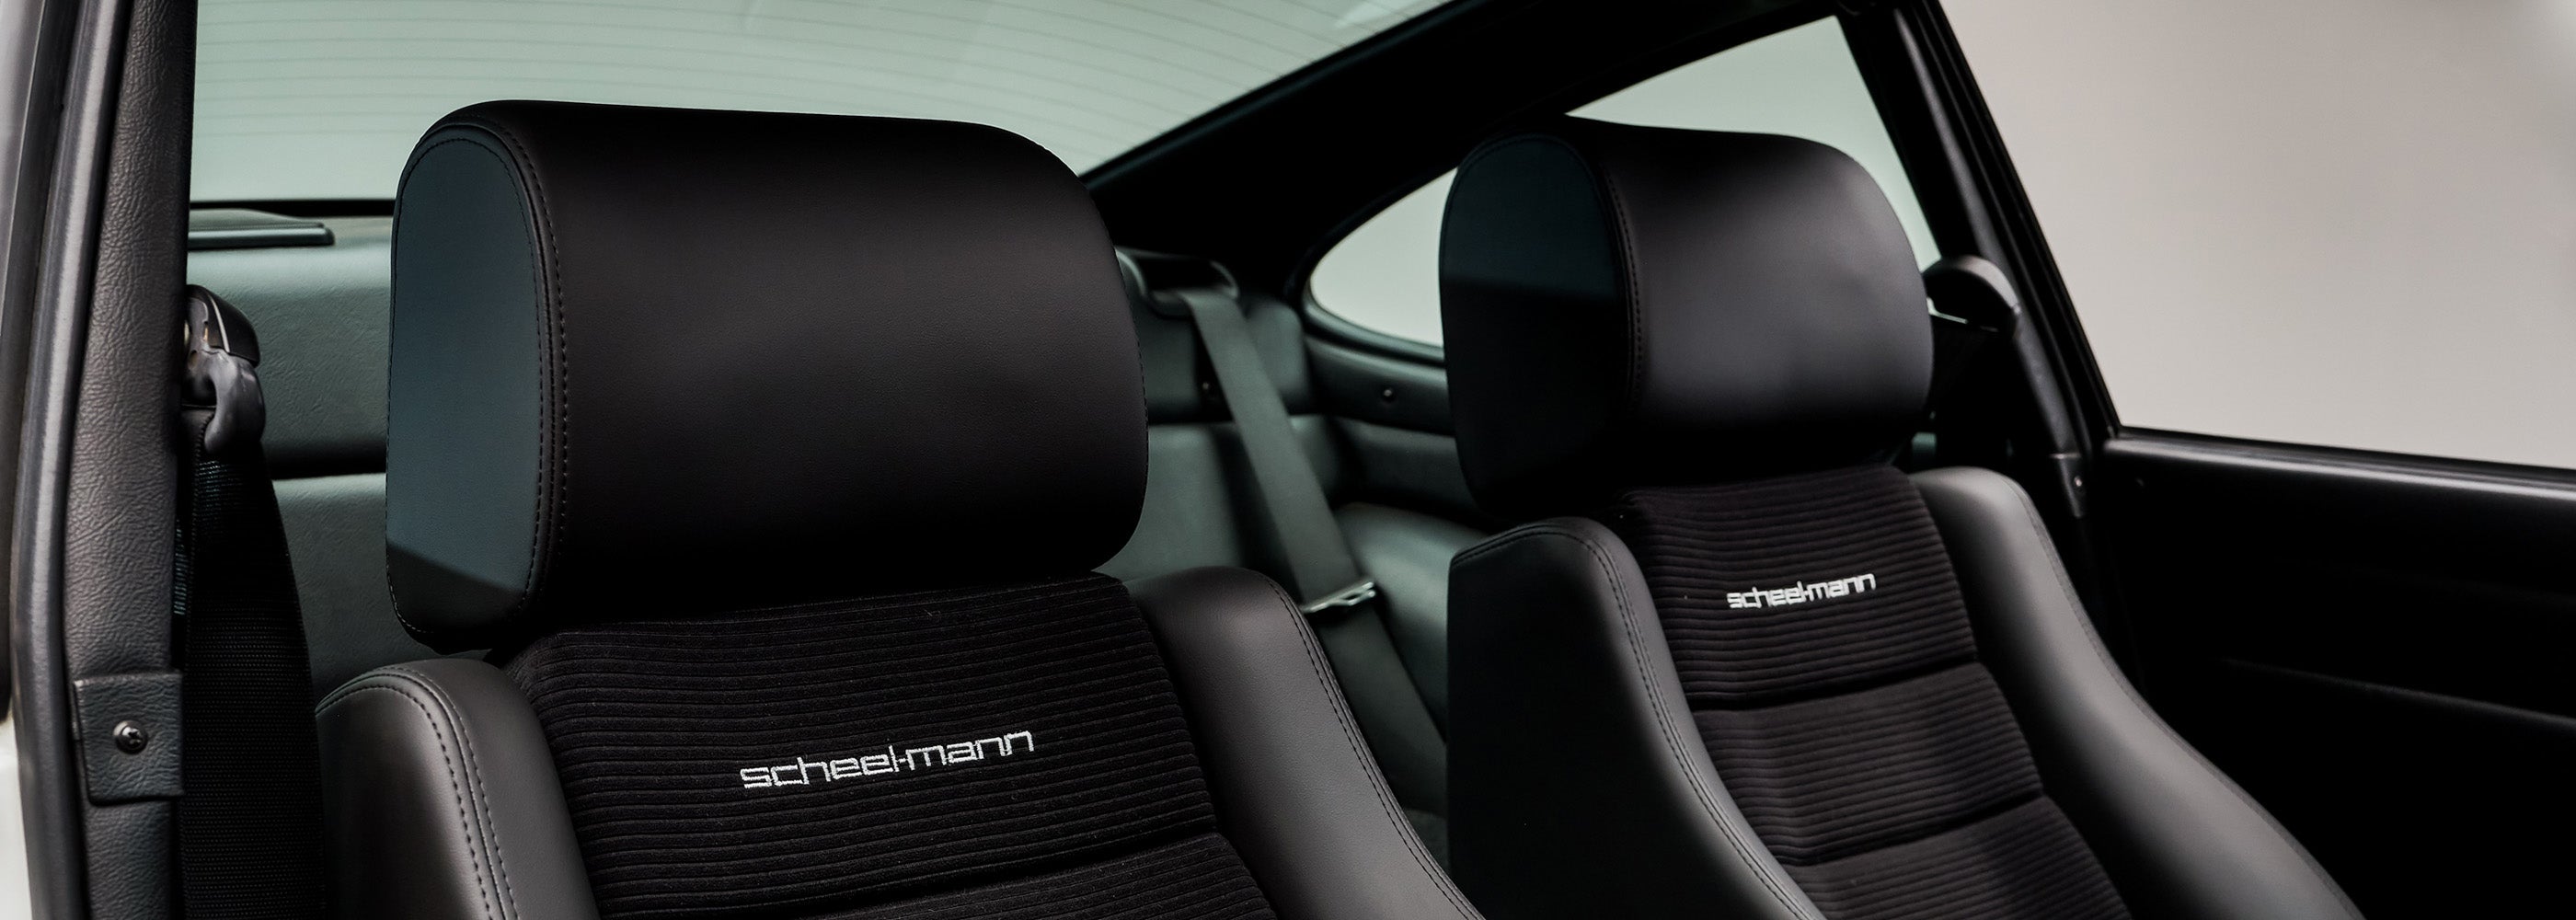 Cars With Built-in Booster Seats: Which Models Offer Integrated